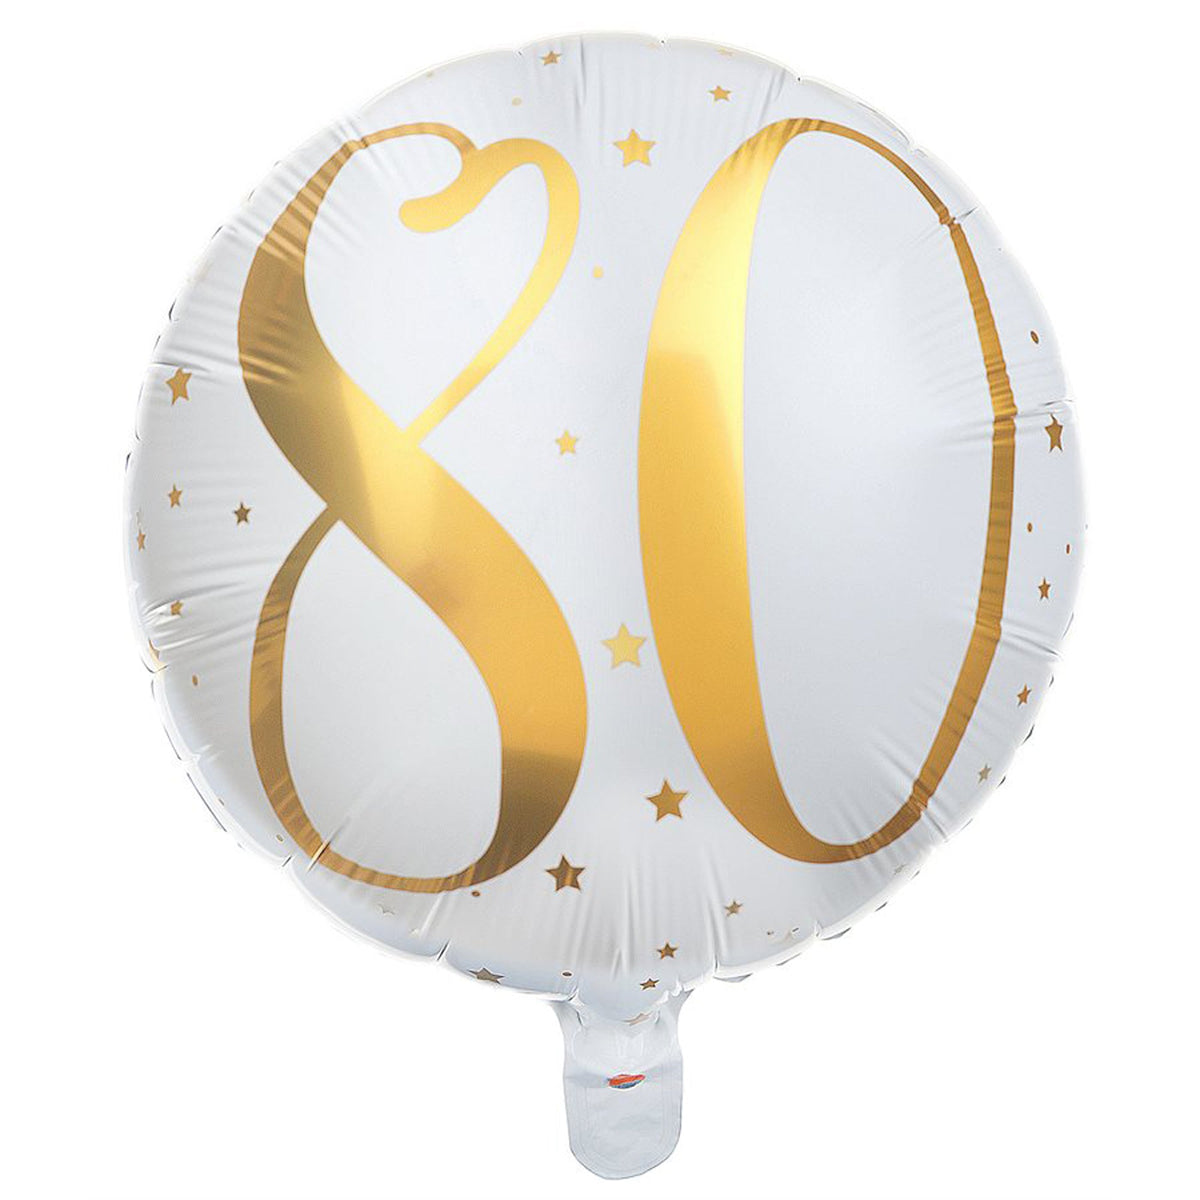 LE GROUPE BLC INTL INC Balloons Gold Trendy Age 80th Birthday Foil Balloon, 18 Inches, 1 Count 3660380067825